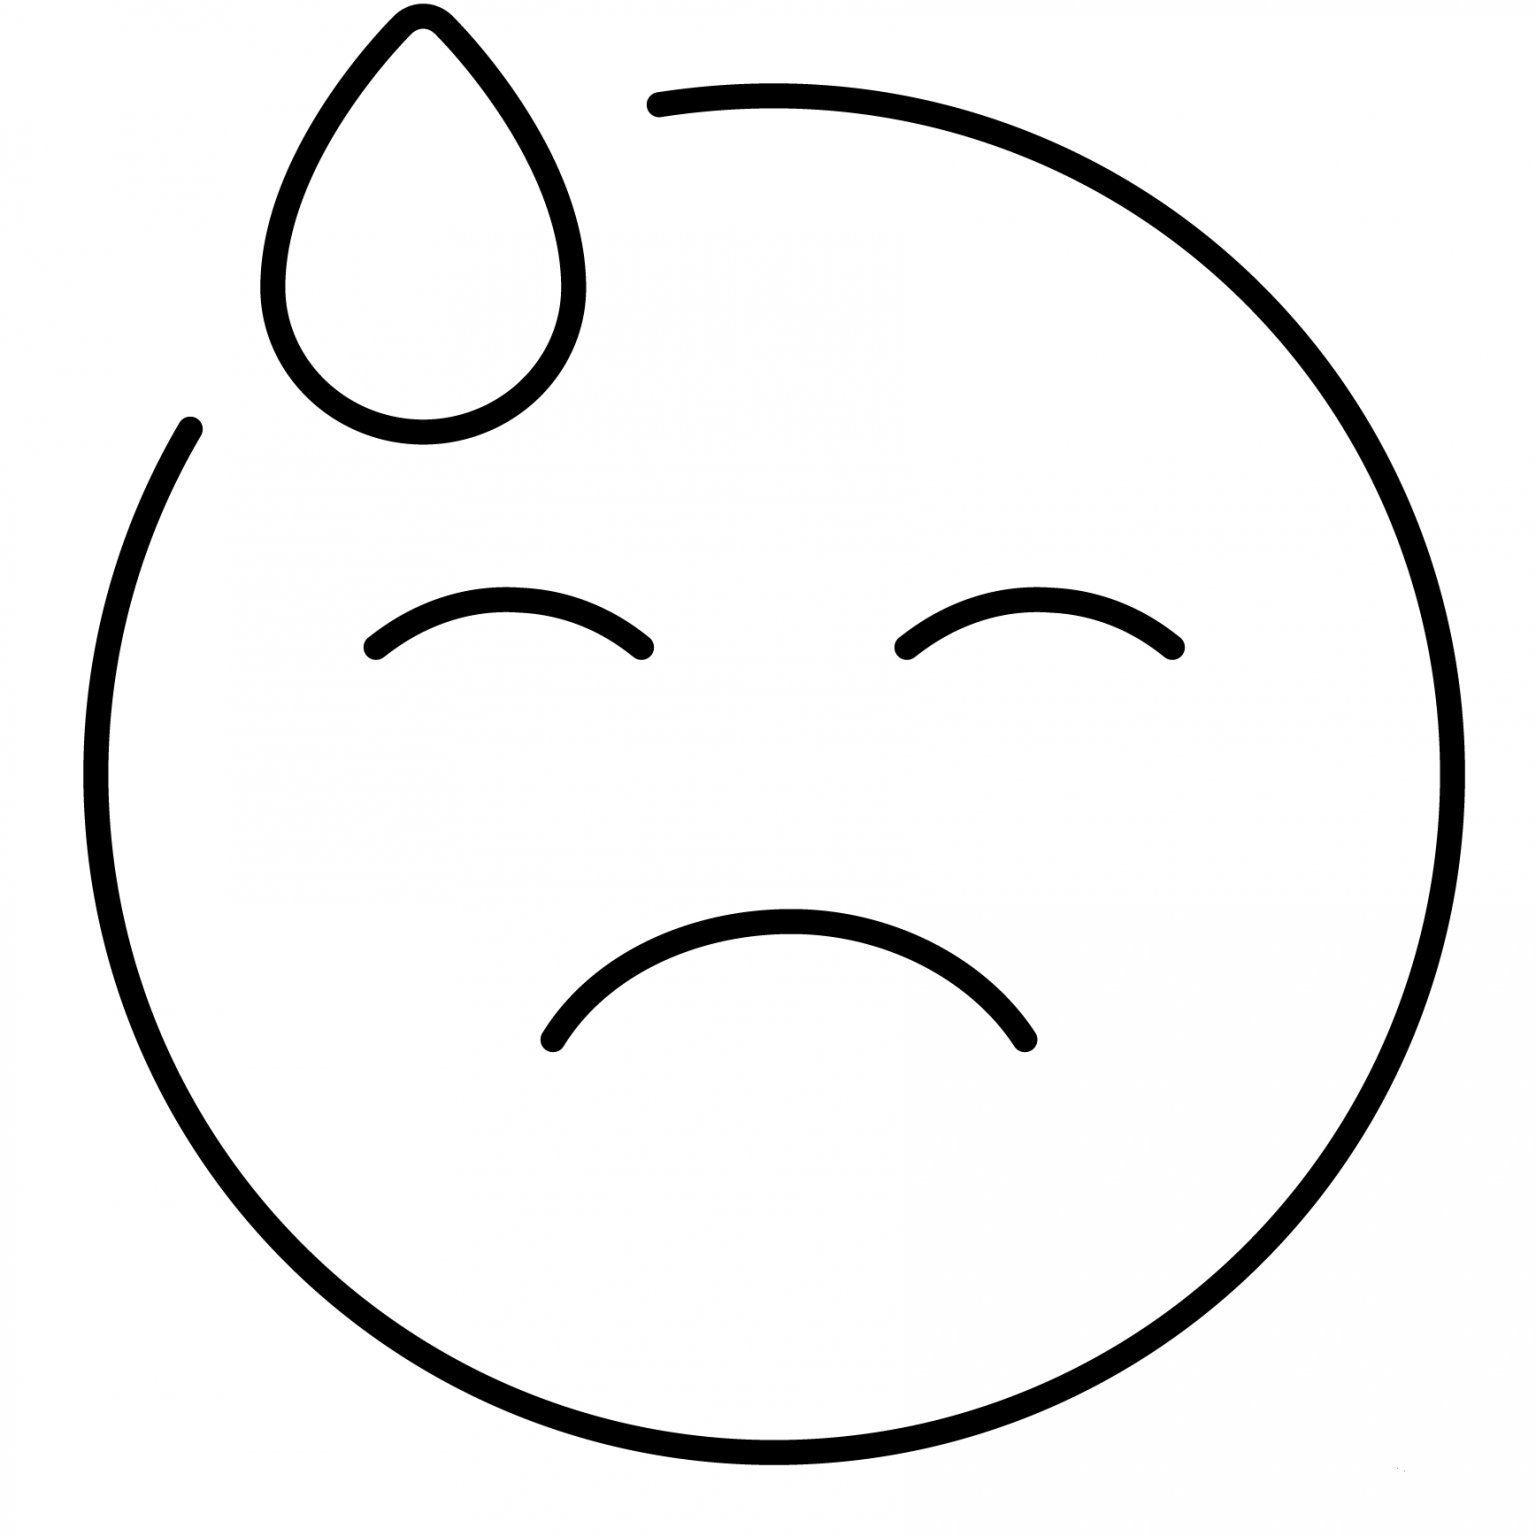 Downcast Face with Sweat Emoji coloring page - ColouringPages